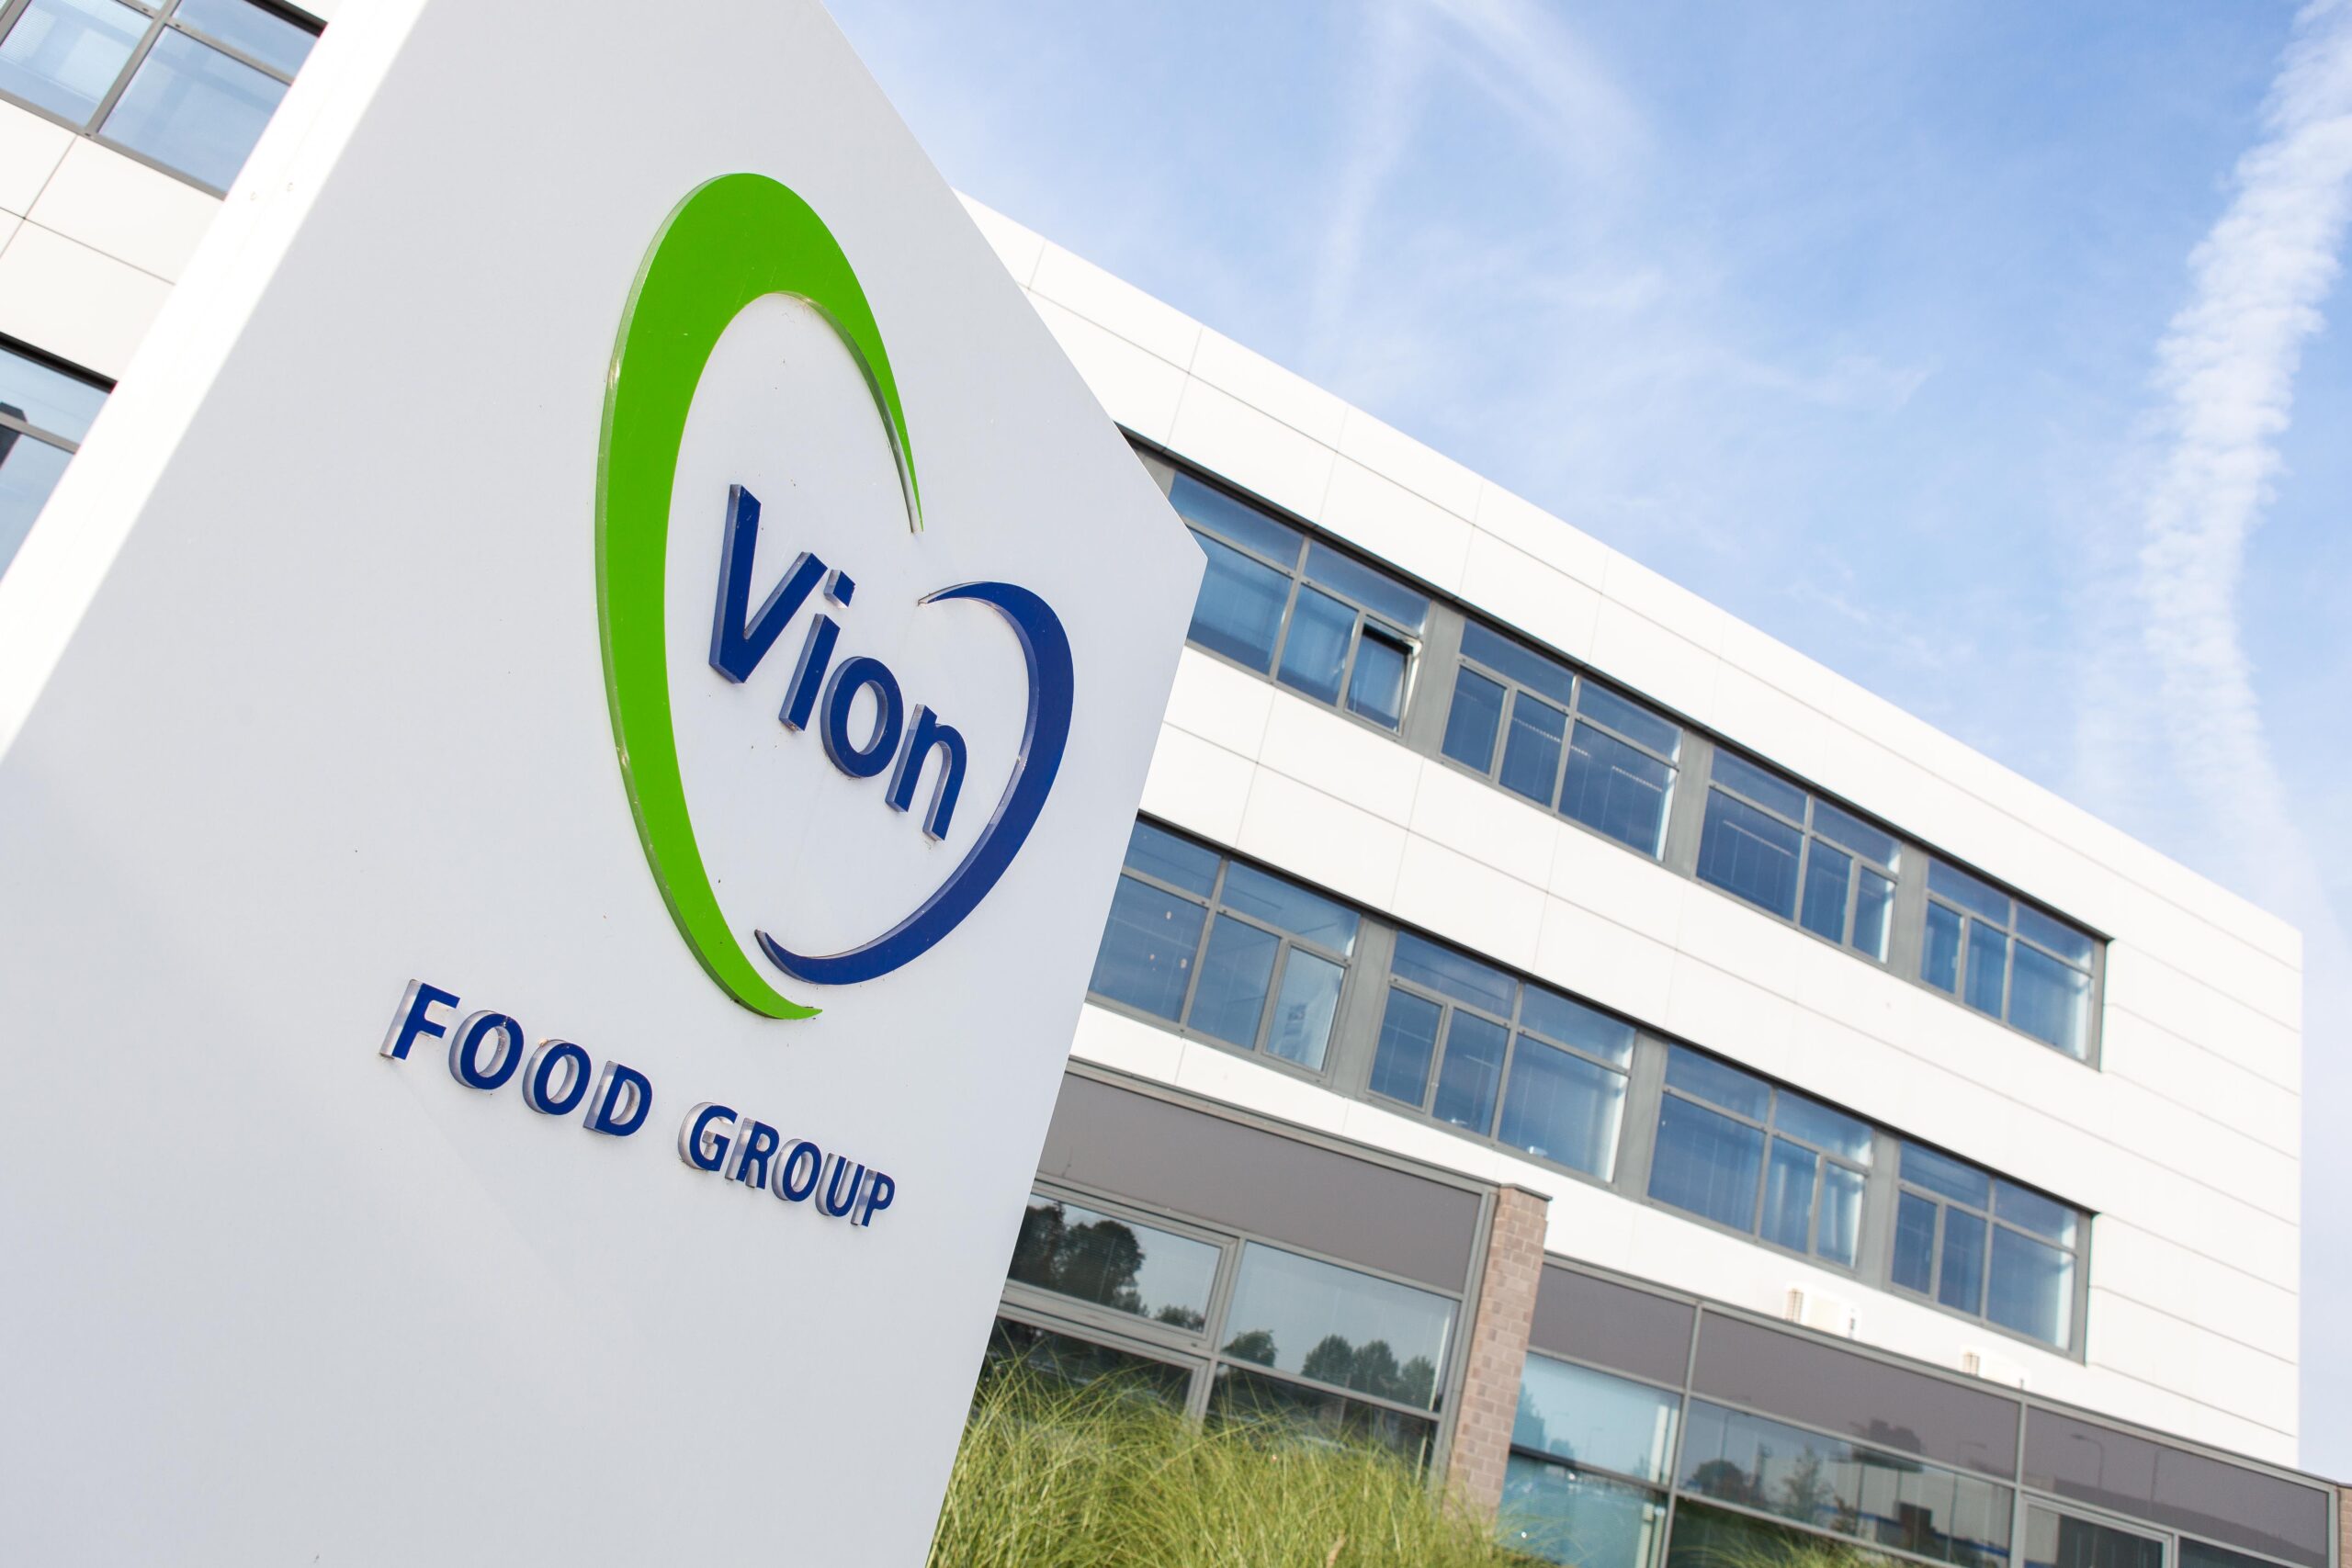 Vion’s vision of being a good employer regarding third-party workers